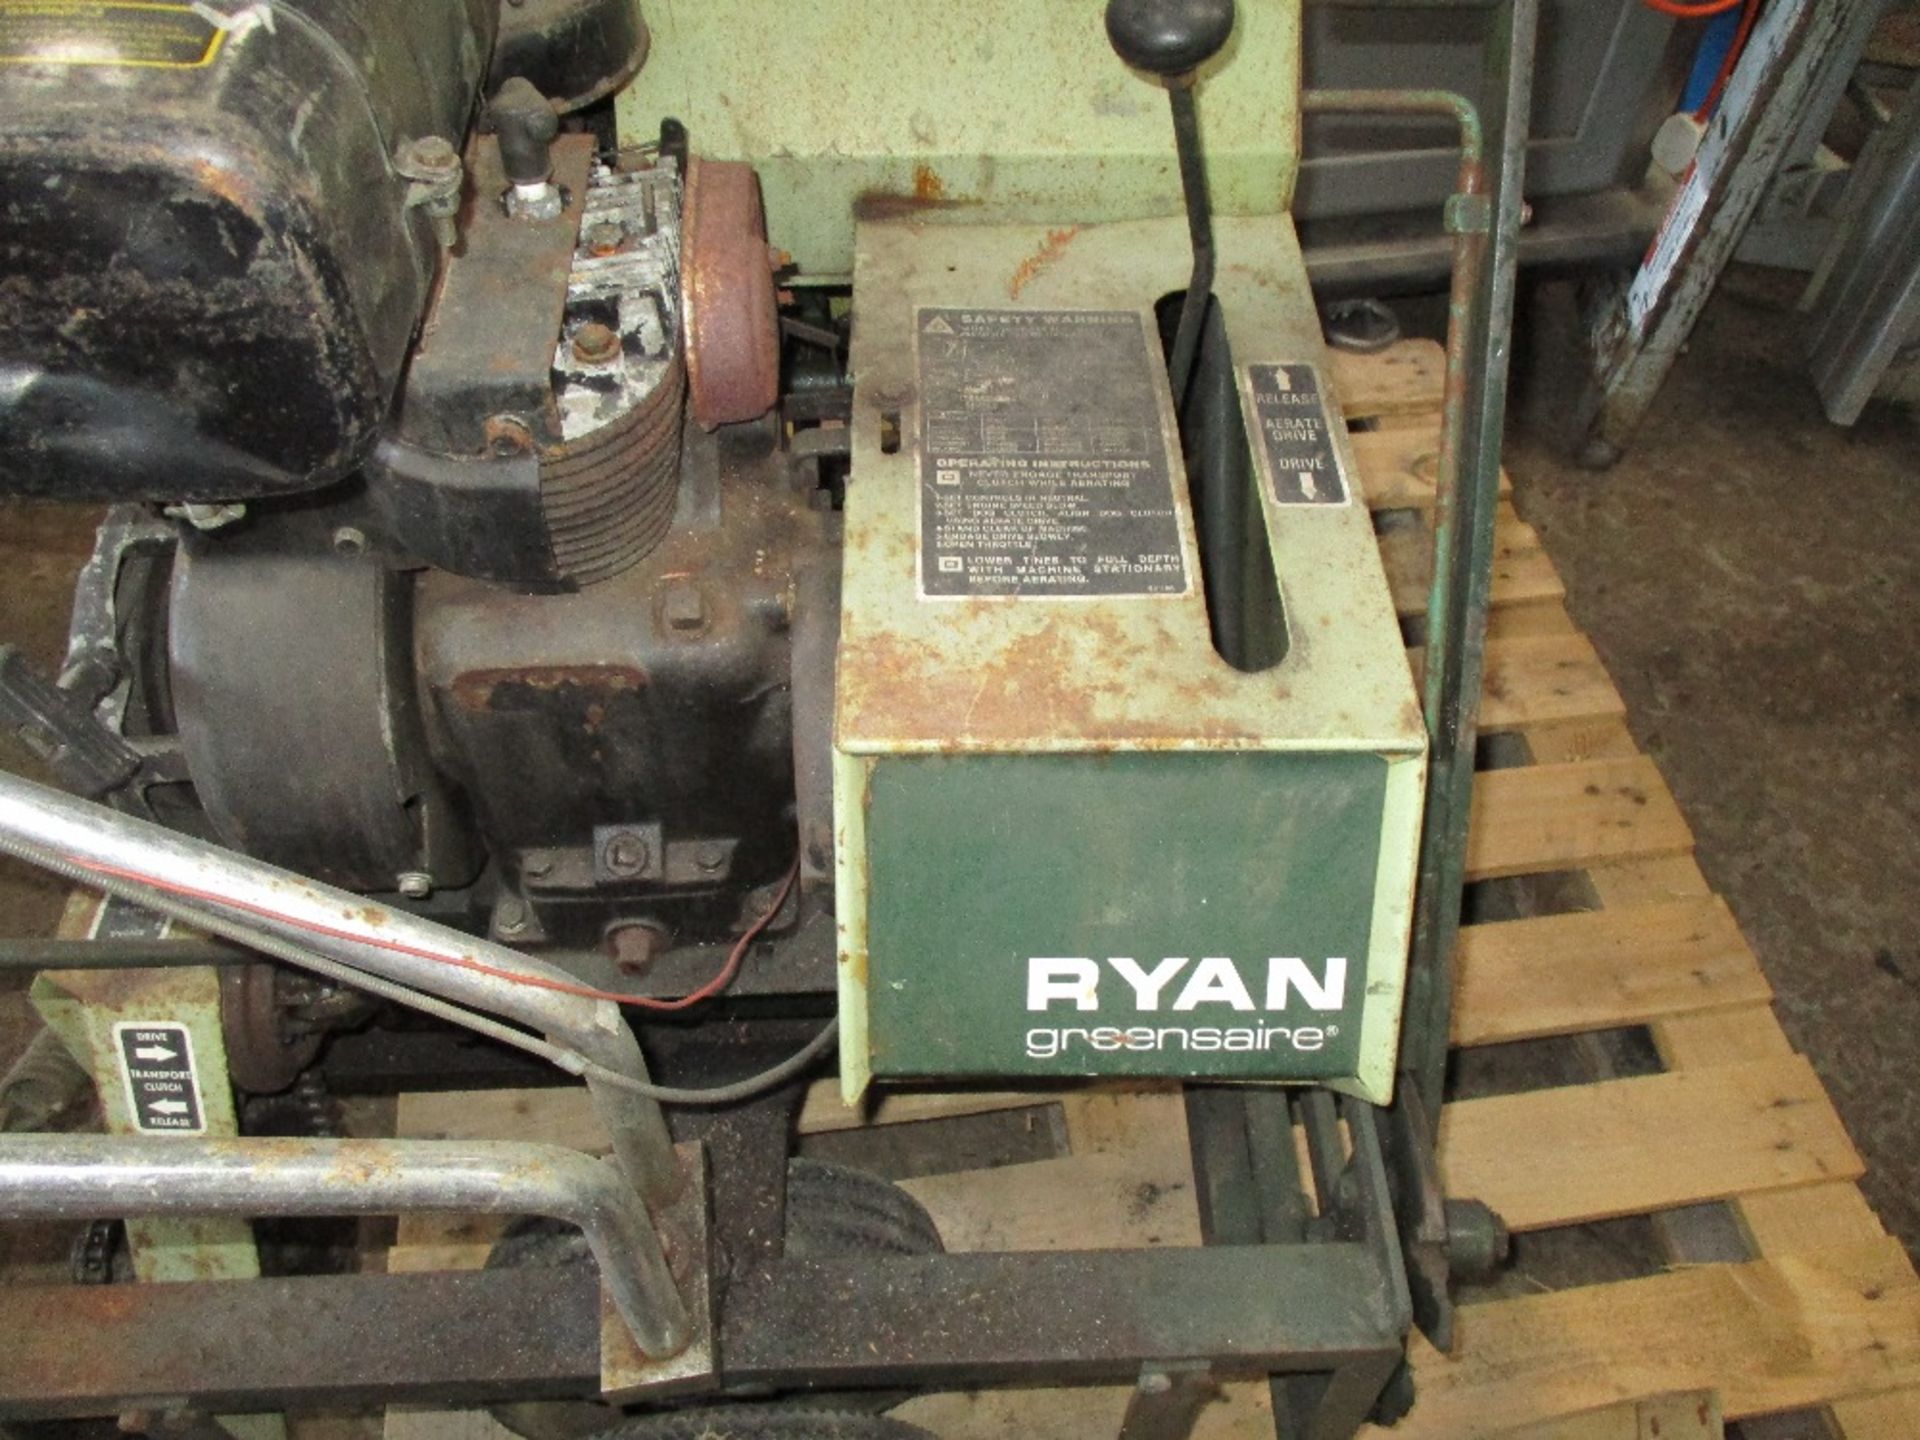 RYAN PETROL ENGINED AERATOR WITH ADDITIONAL PARTS - Image 4 of 4